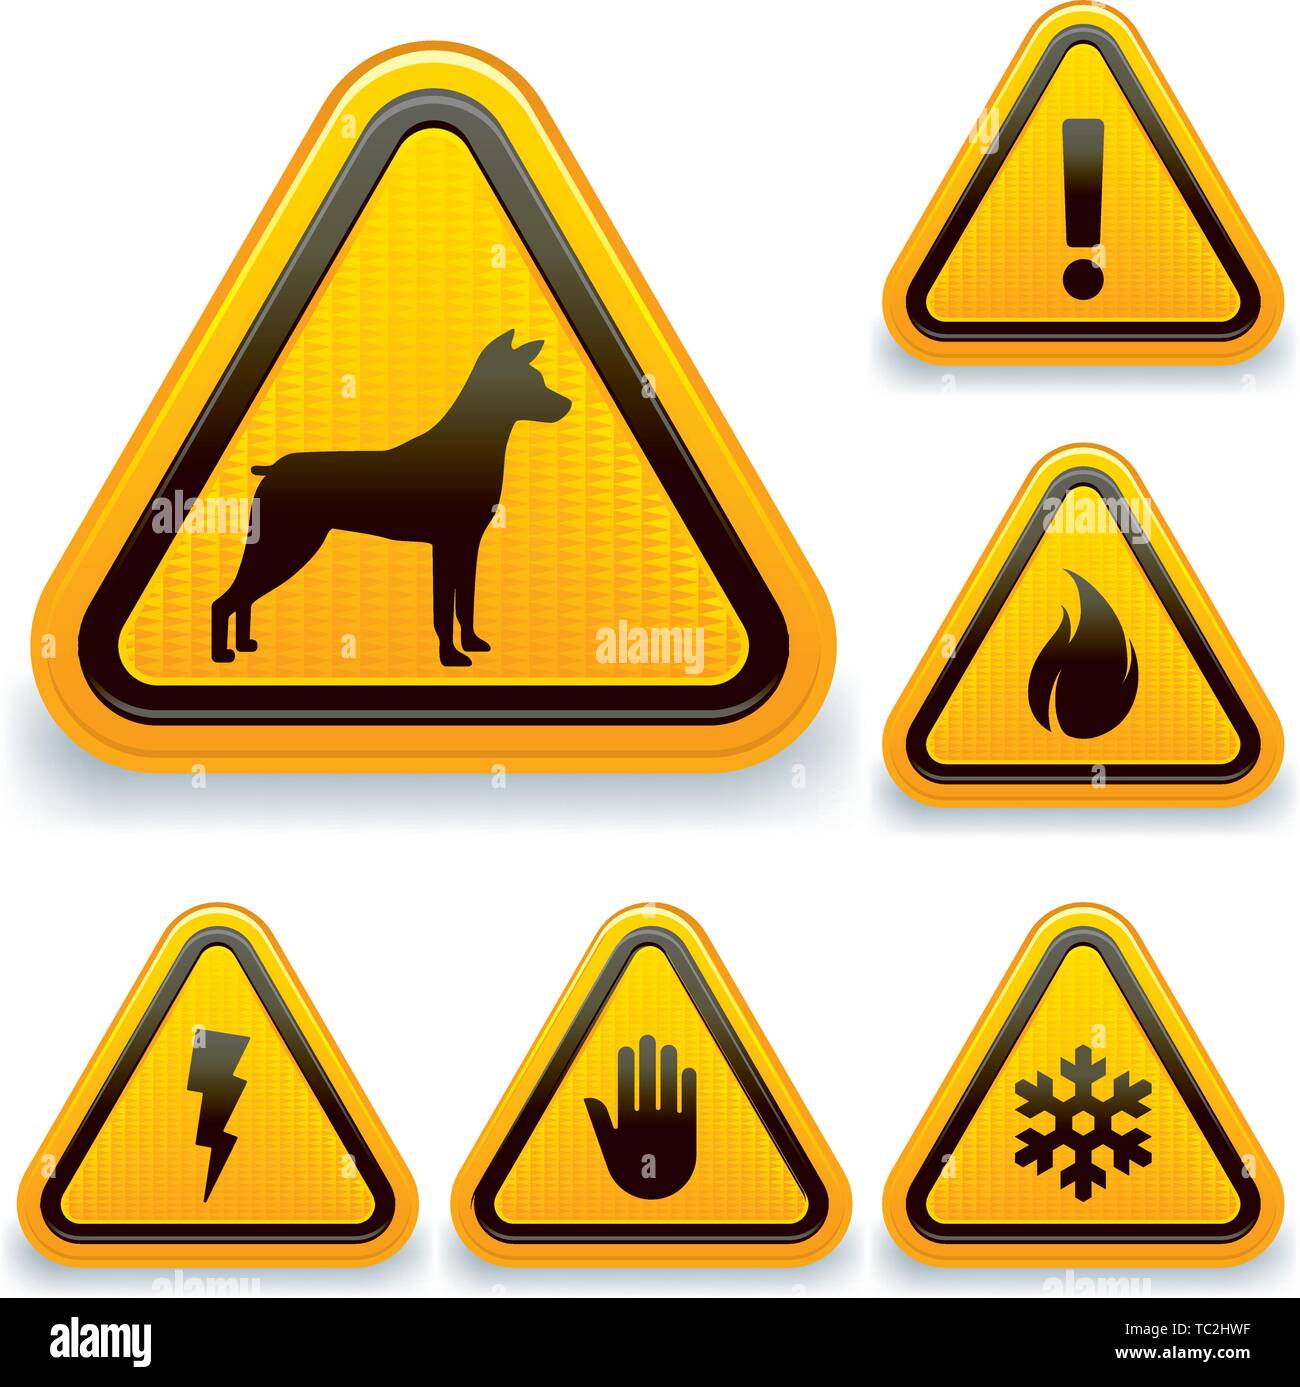 Vector illustration. Six warning symbols with icons in shine style. Stock Vector